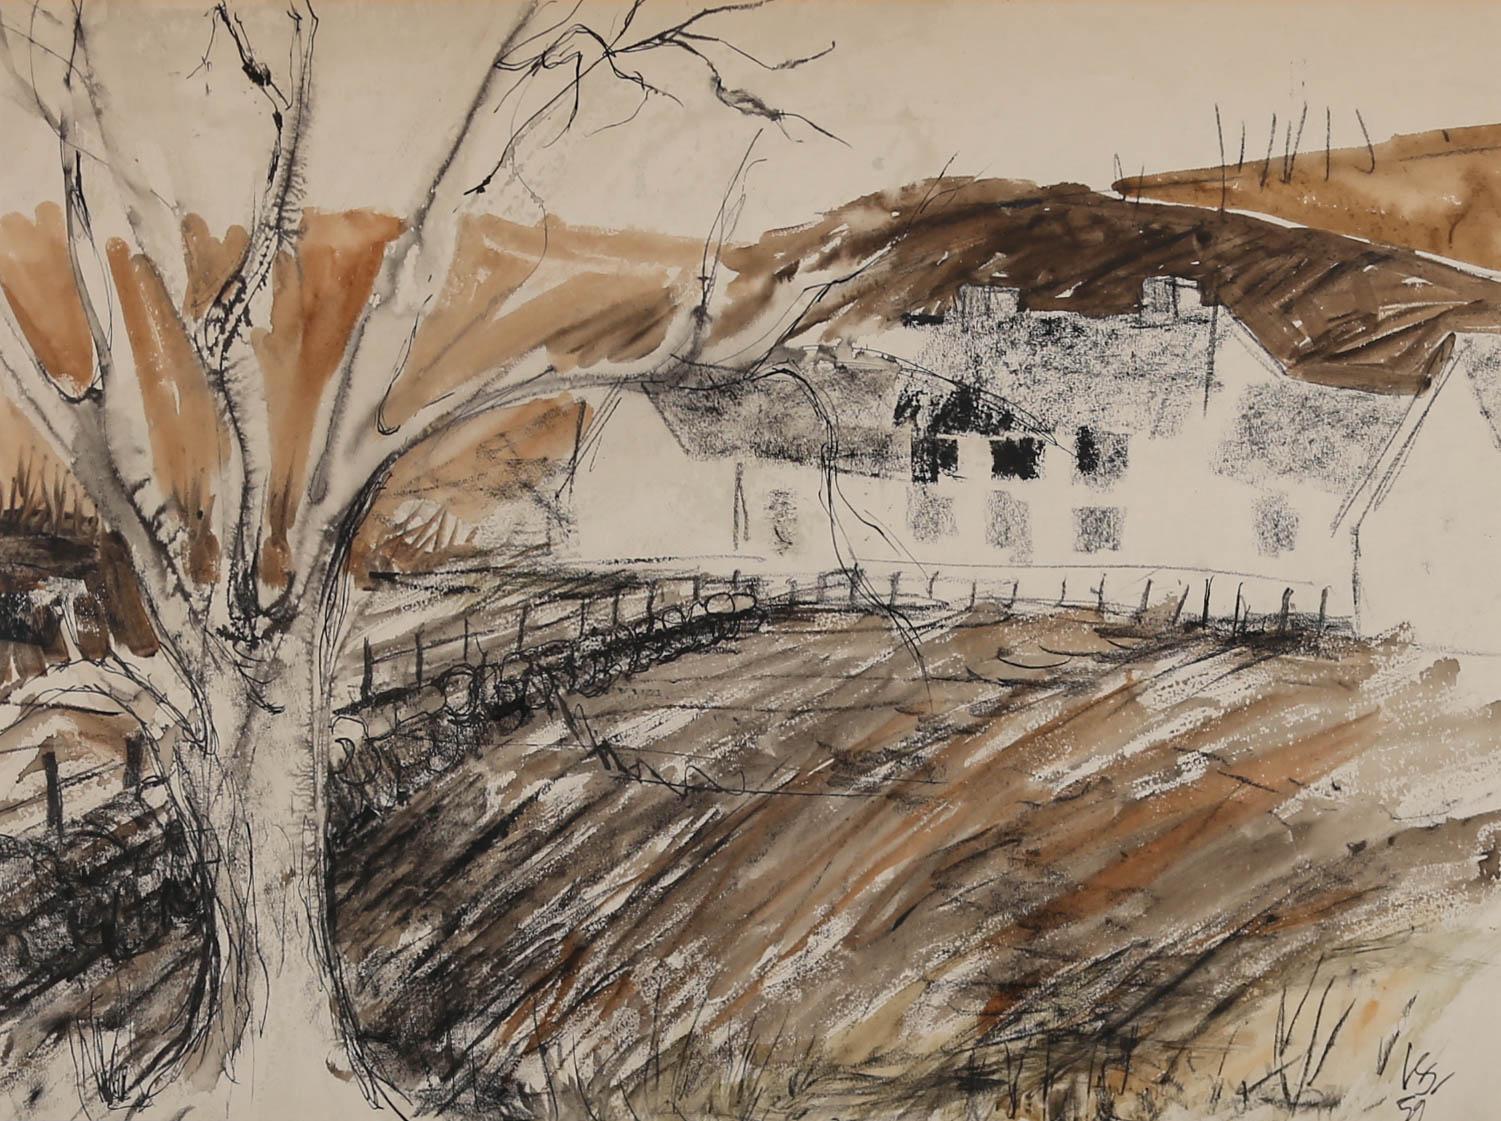 An expressive mid-century landscape showing a hamlet of cottage houses surrounded by ploughed fields. The artist has used a combination of muddy watercolours, black ink and soft charcoal to bring a sense of atmosphere to this weathered scene. Signed